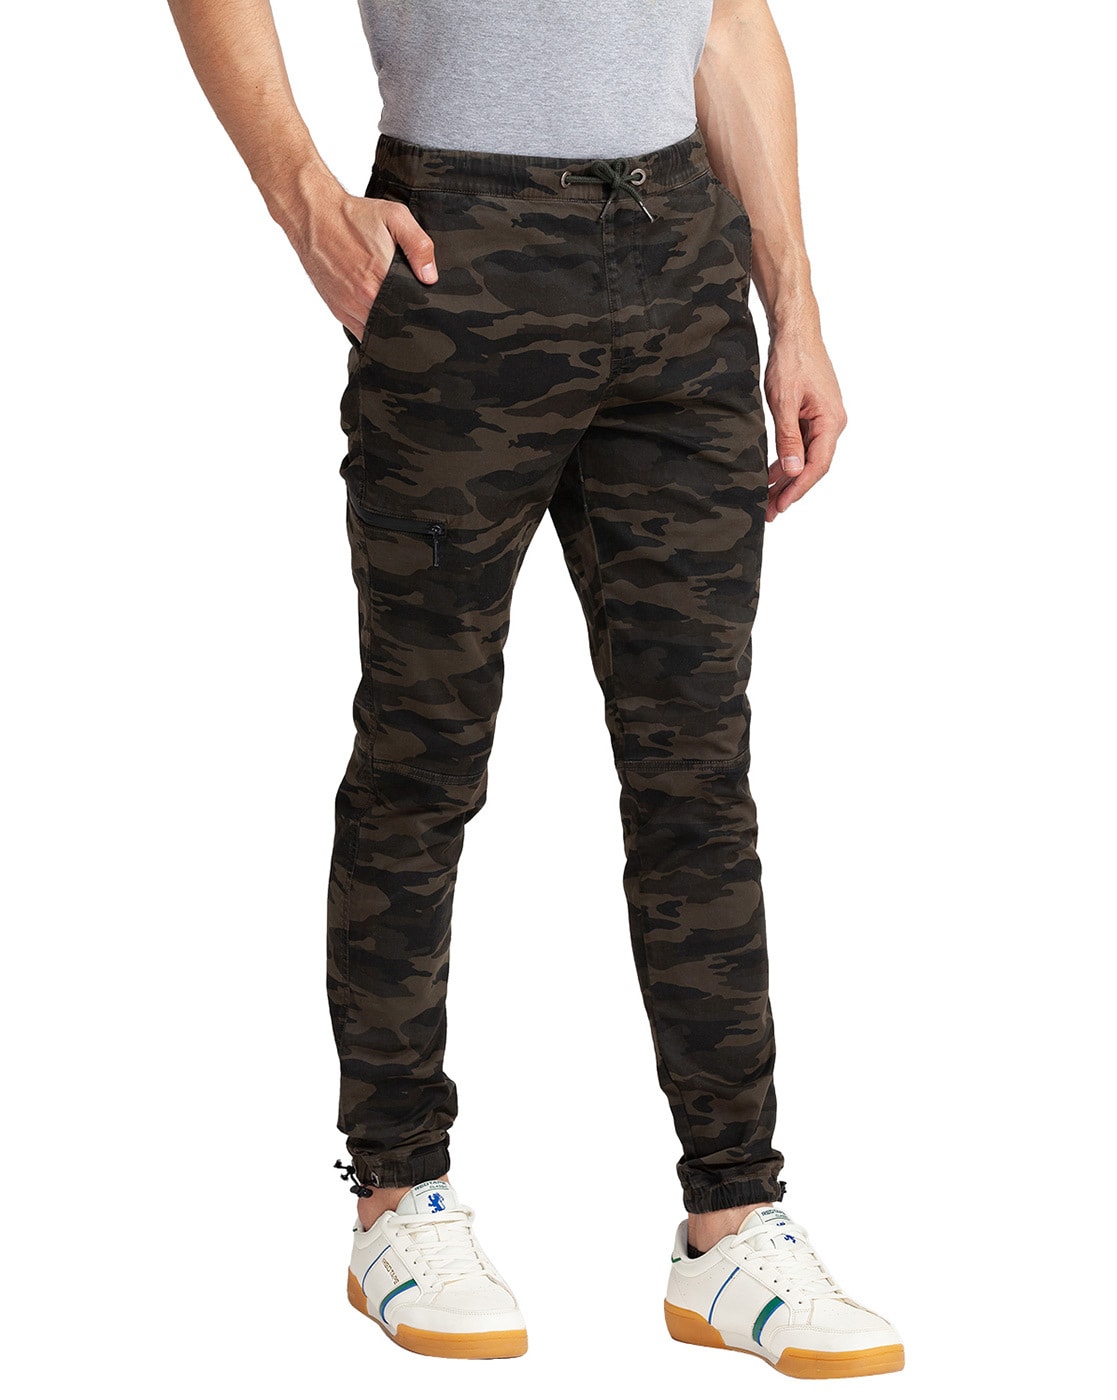 XL  L Steppe 300 Camouflage Trousers  Woodland Green